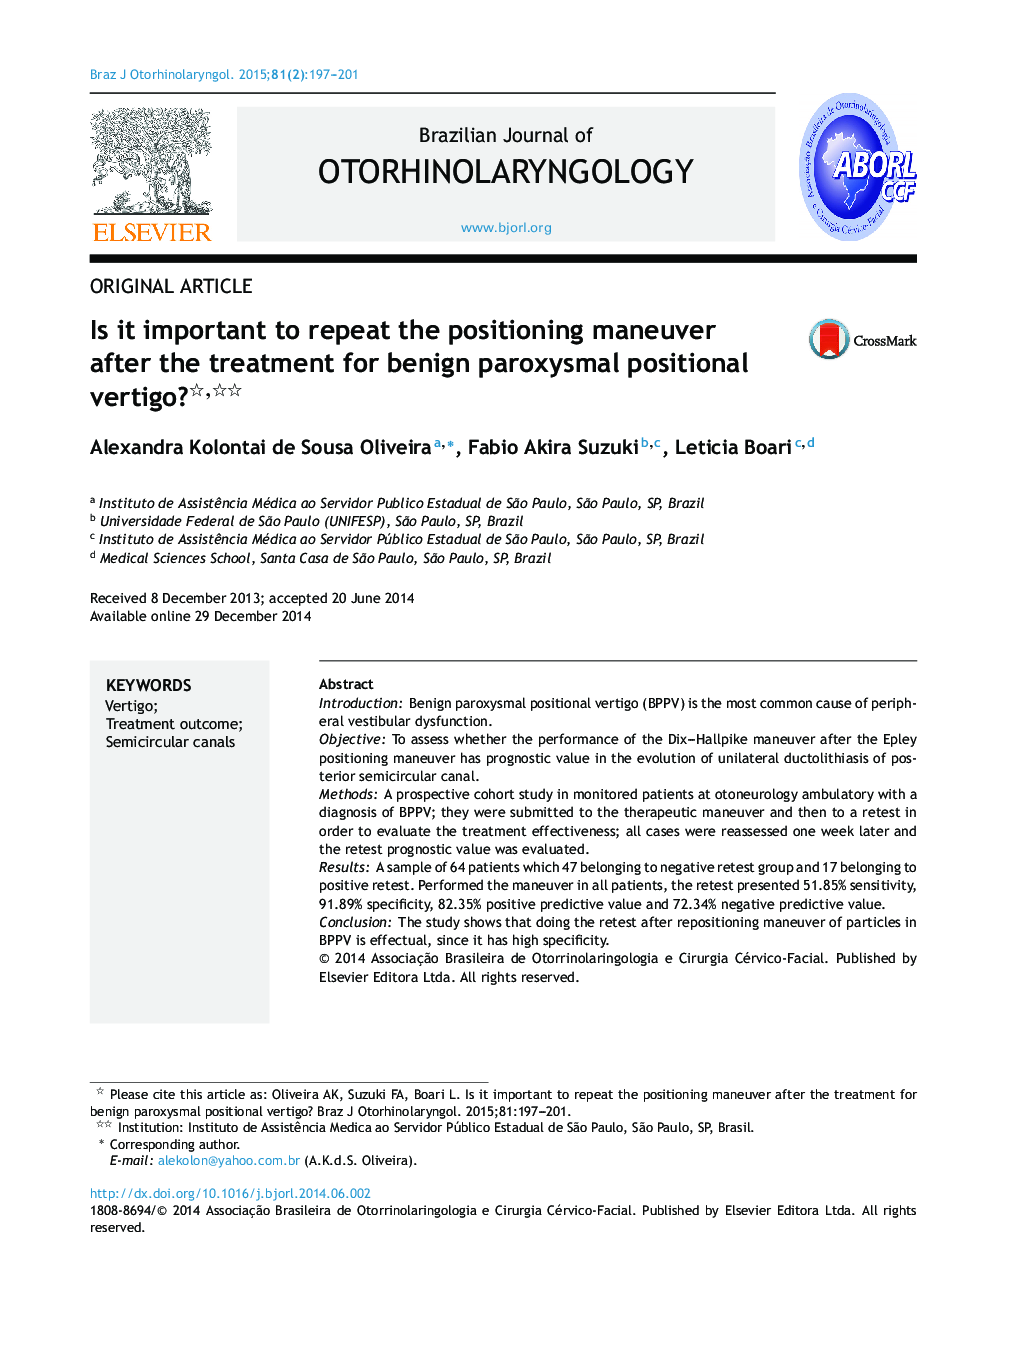 Is it important to repeat the positioning maneuver after the treatment for benign paroxysmal positional vertigo? 